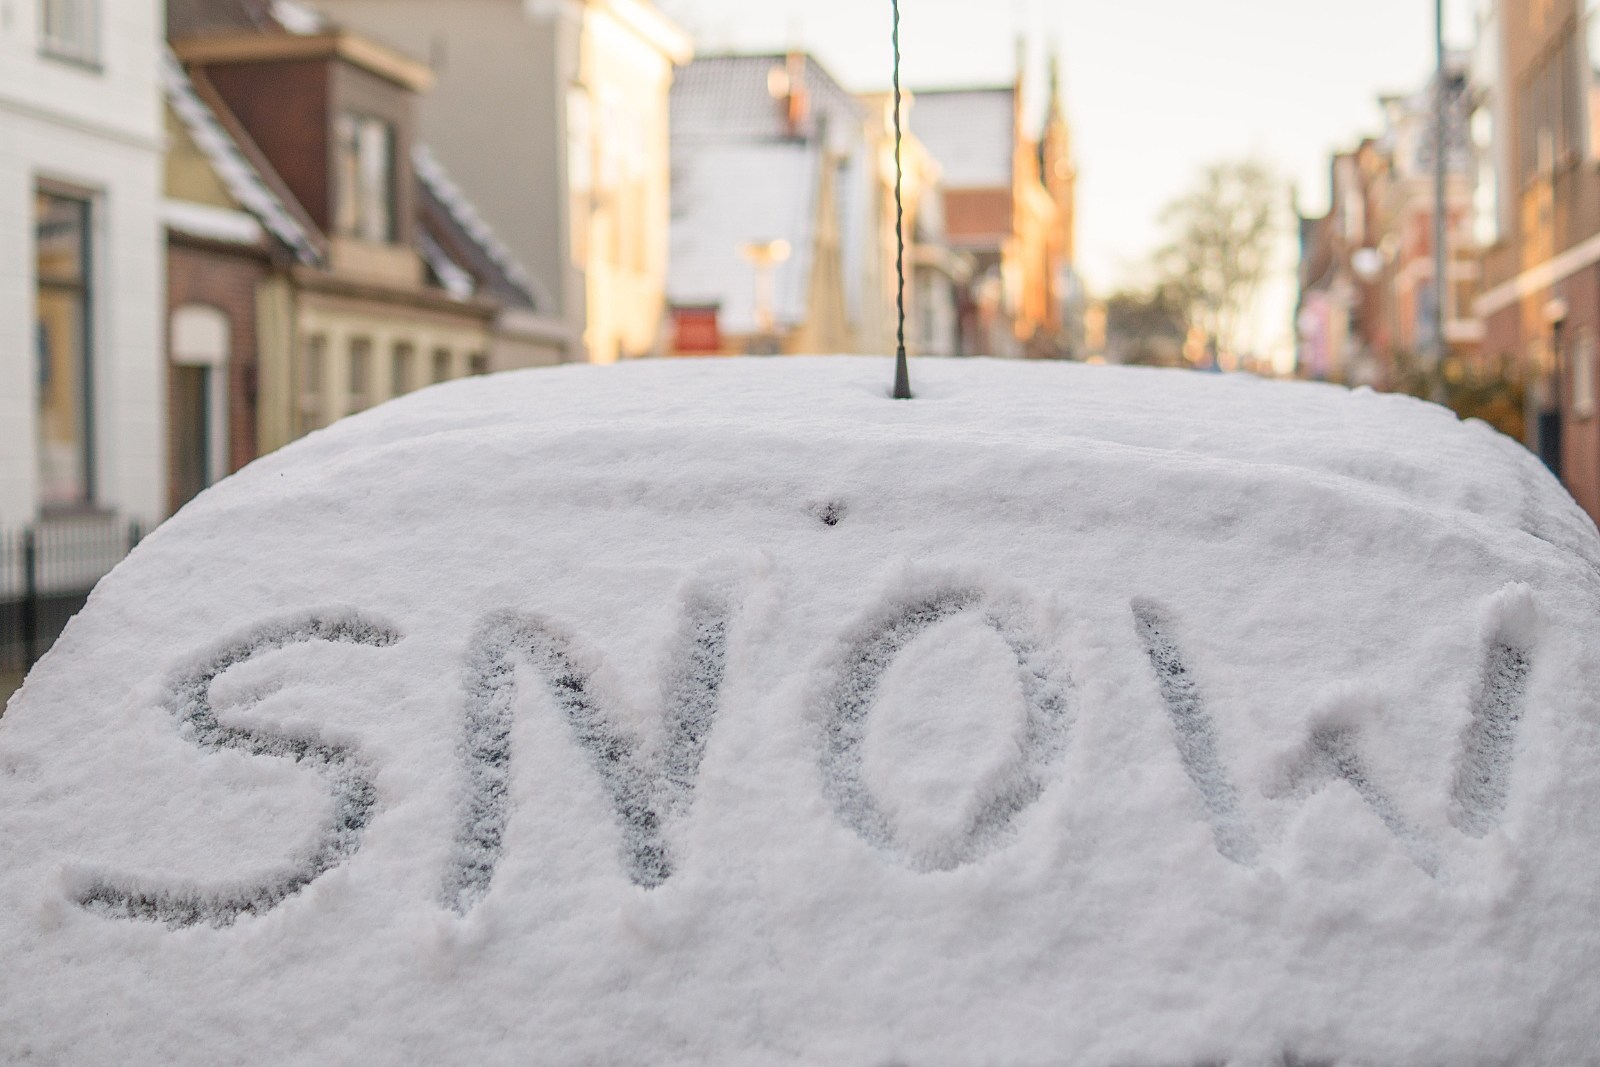 Does 'Warming Up' Your Frozen Car Really Matter